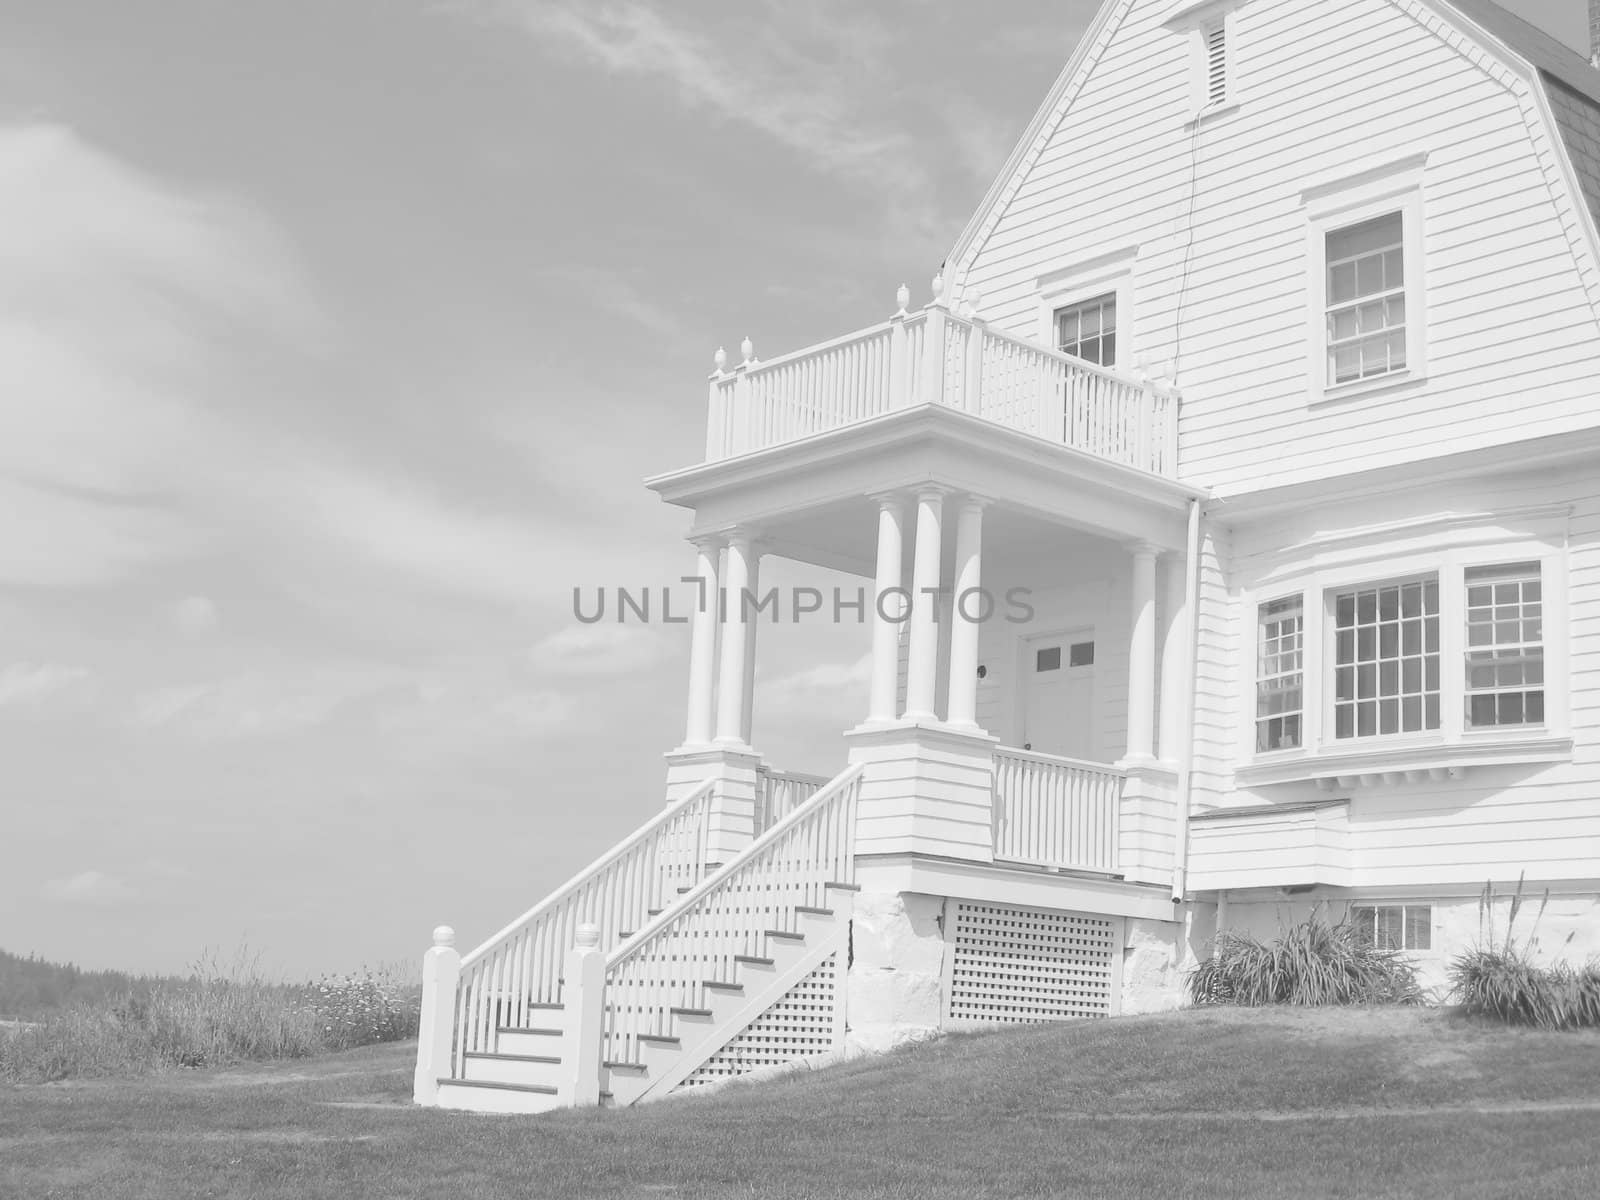 a late 19th century light keepers house, in black and white
